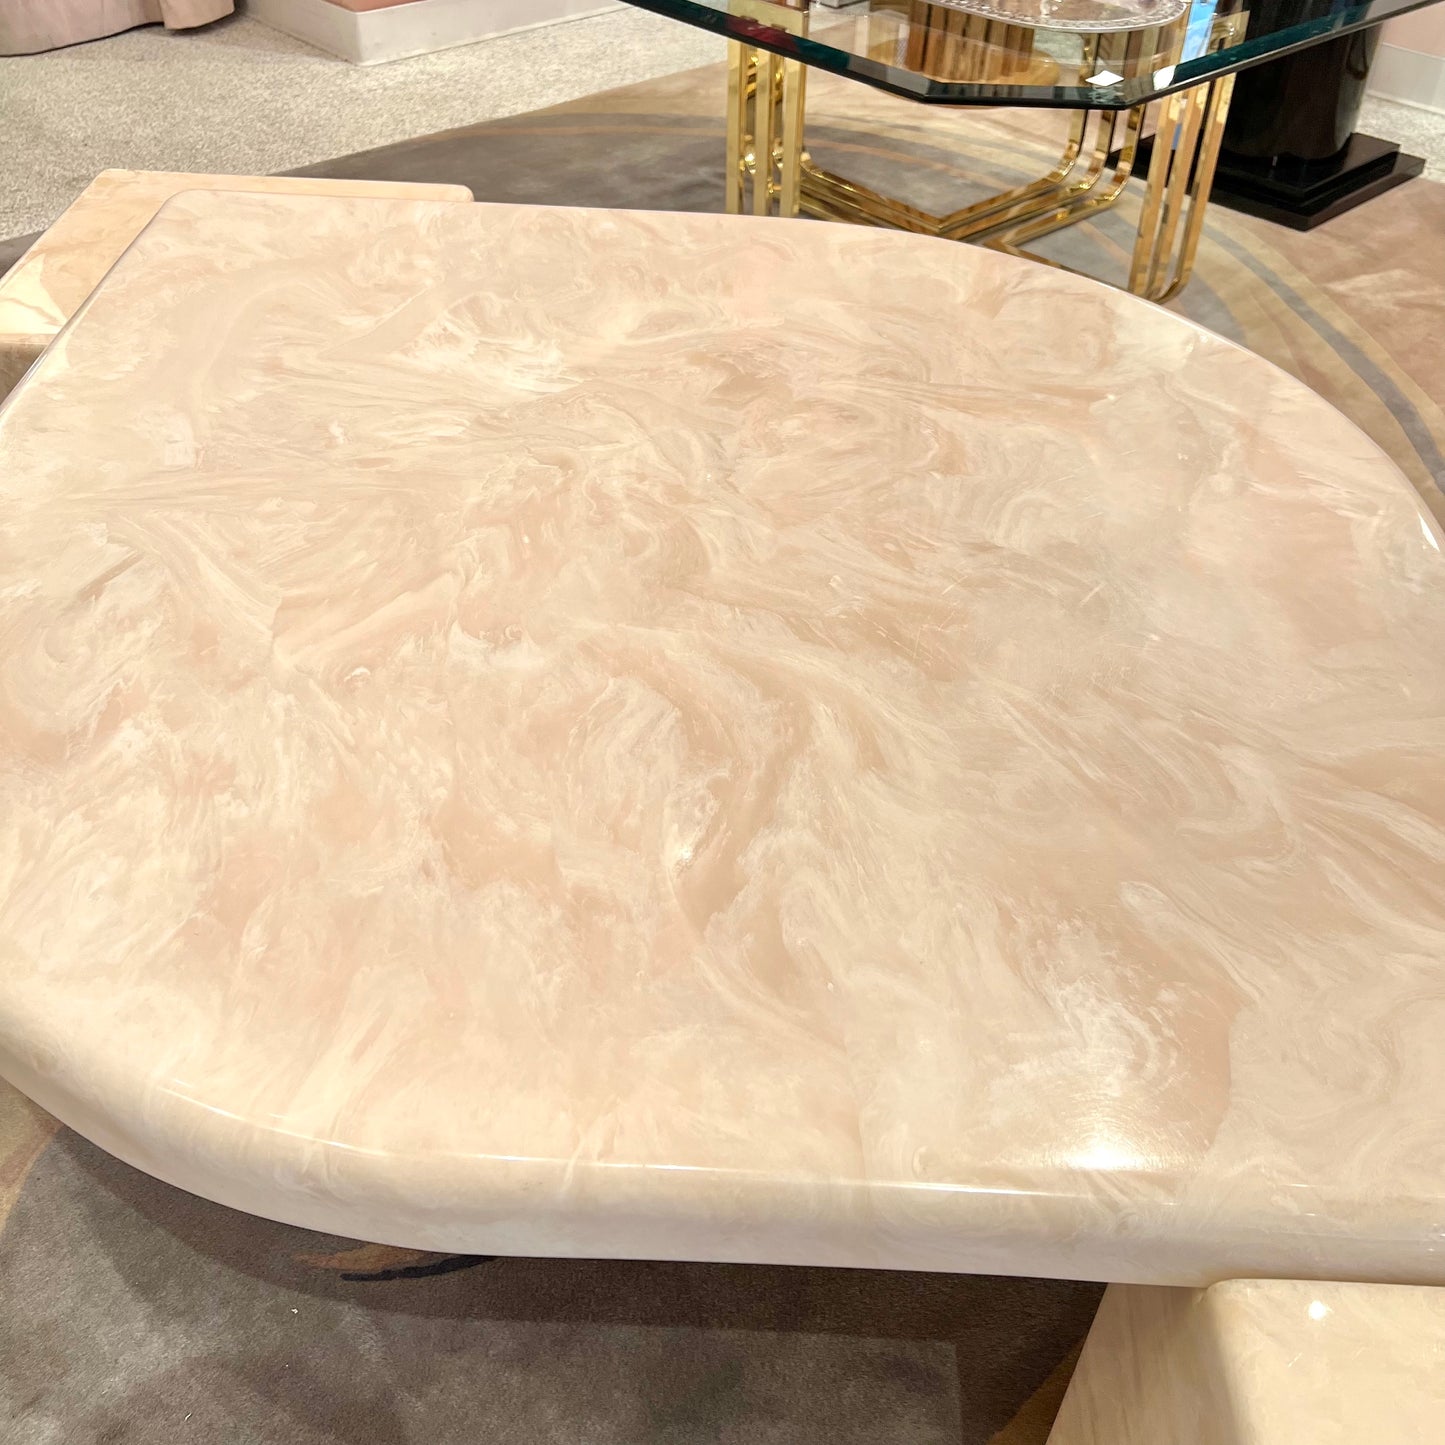 1980’s Cream Marbled Resin Cat Eye Coffee Table